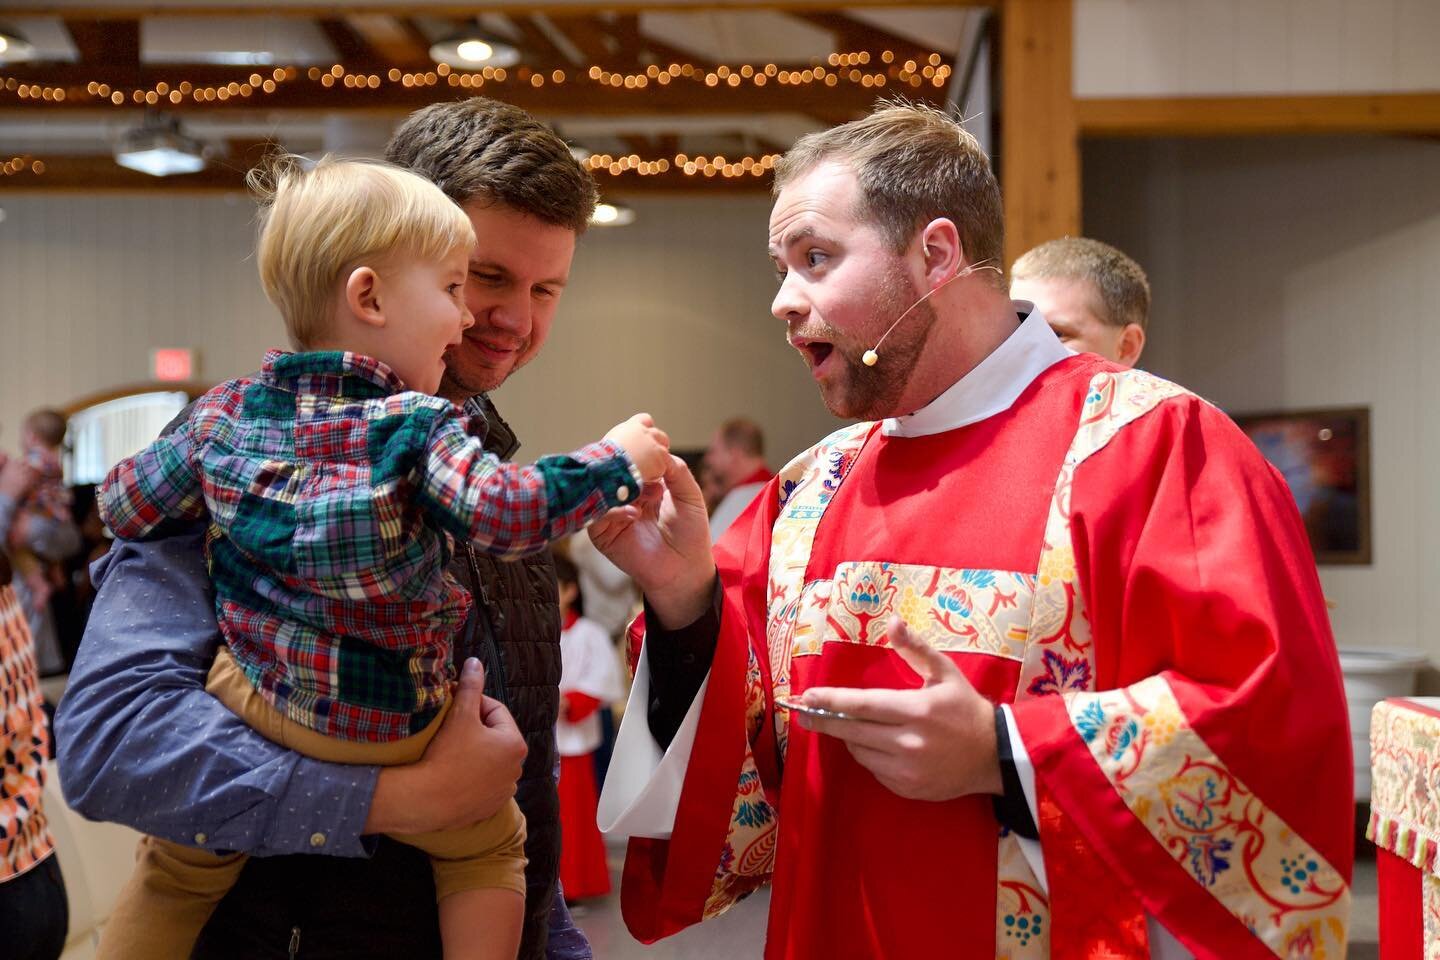 We&rsquo;ve missed sharing some of our favorite snapshots with you these past couple months! But now that we&rsquo;ve got our account back, let the sharing begin&mdash;here&rsquo;s a few joyful moments from ordinations, baptisms, Harvest Festival, an